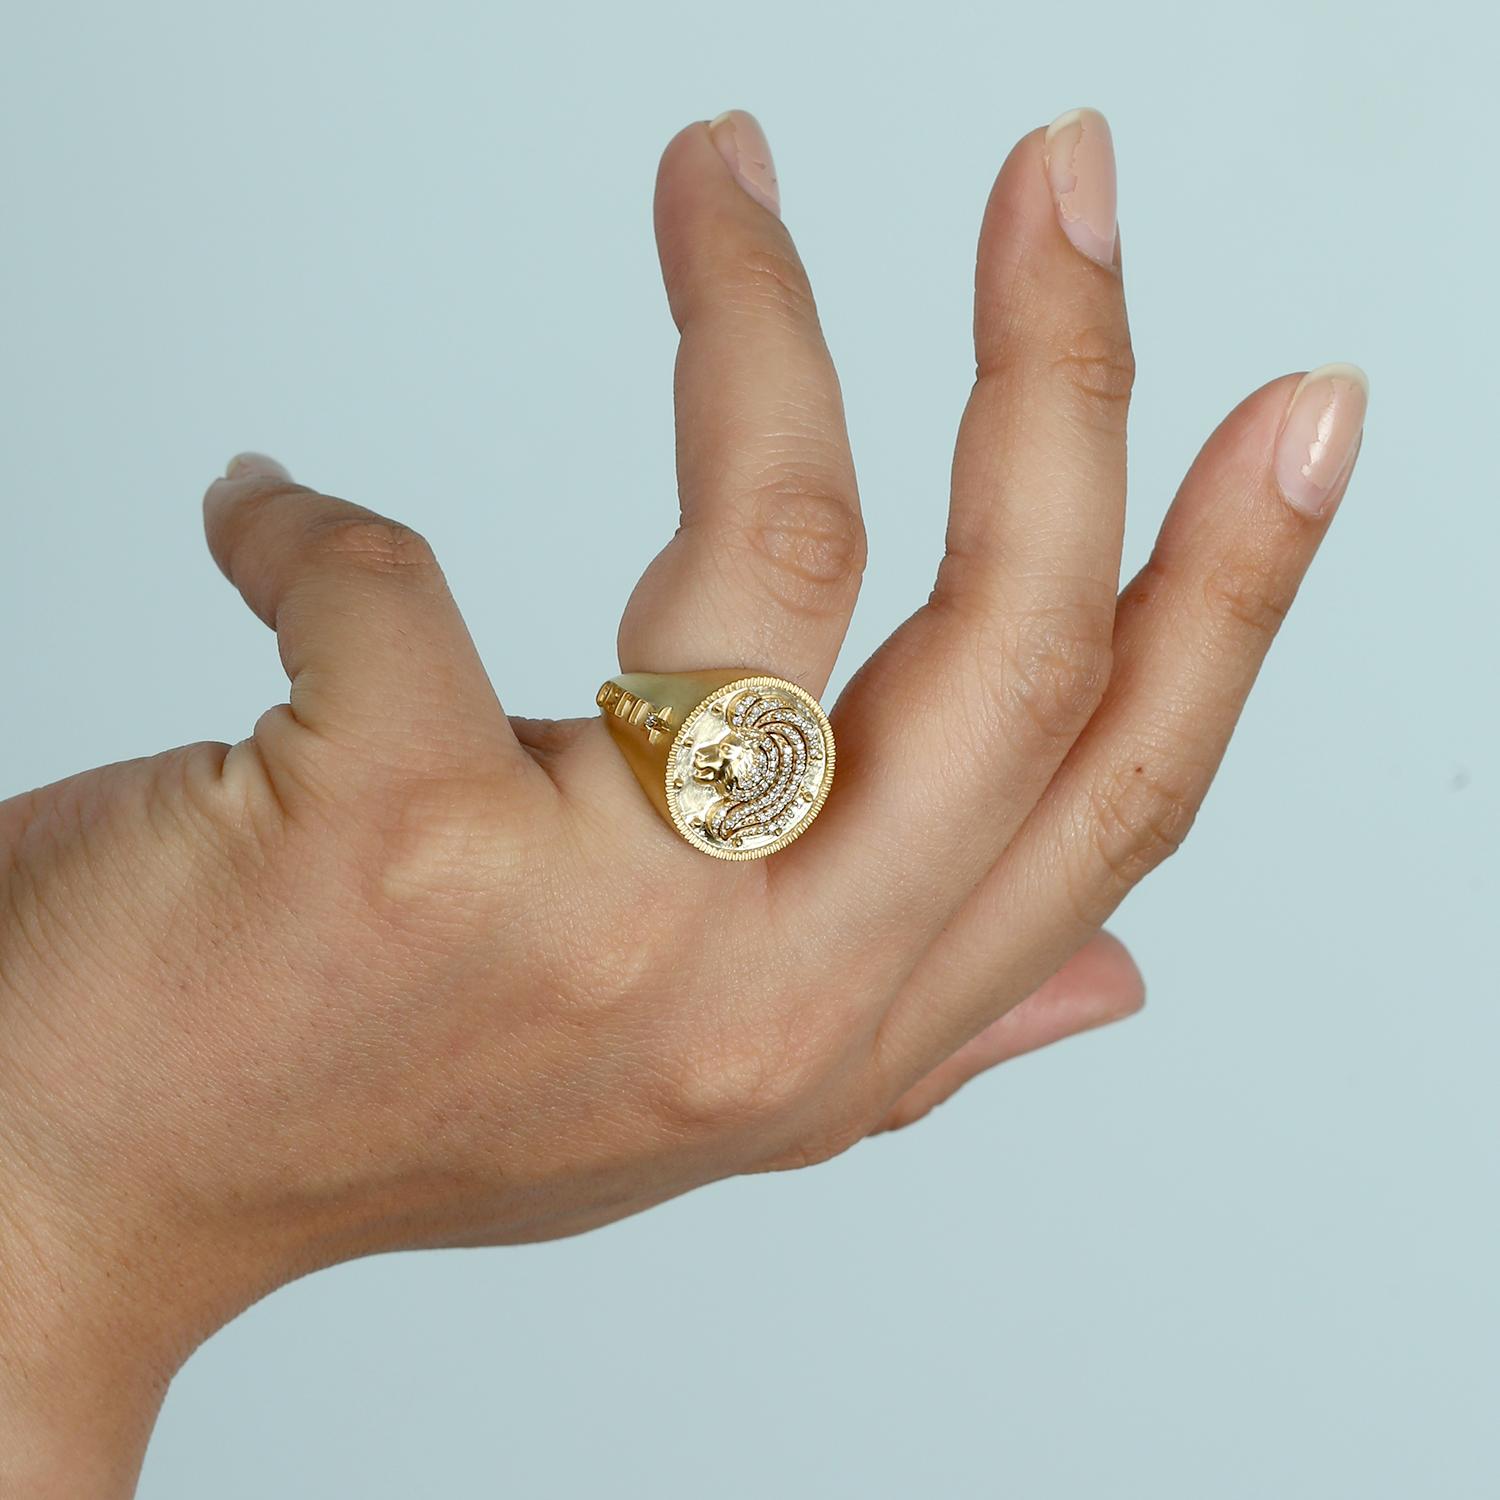 Artisan Leo Zodiac Ring With Pave Diamonds Made in 14k Yellow Gold For Sale